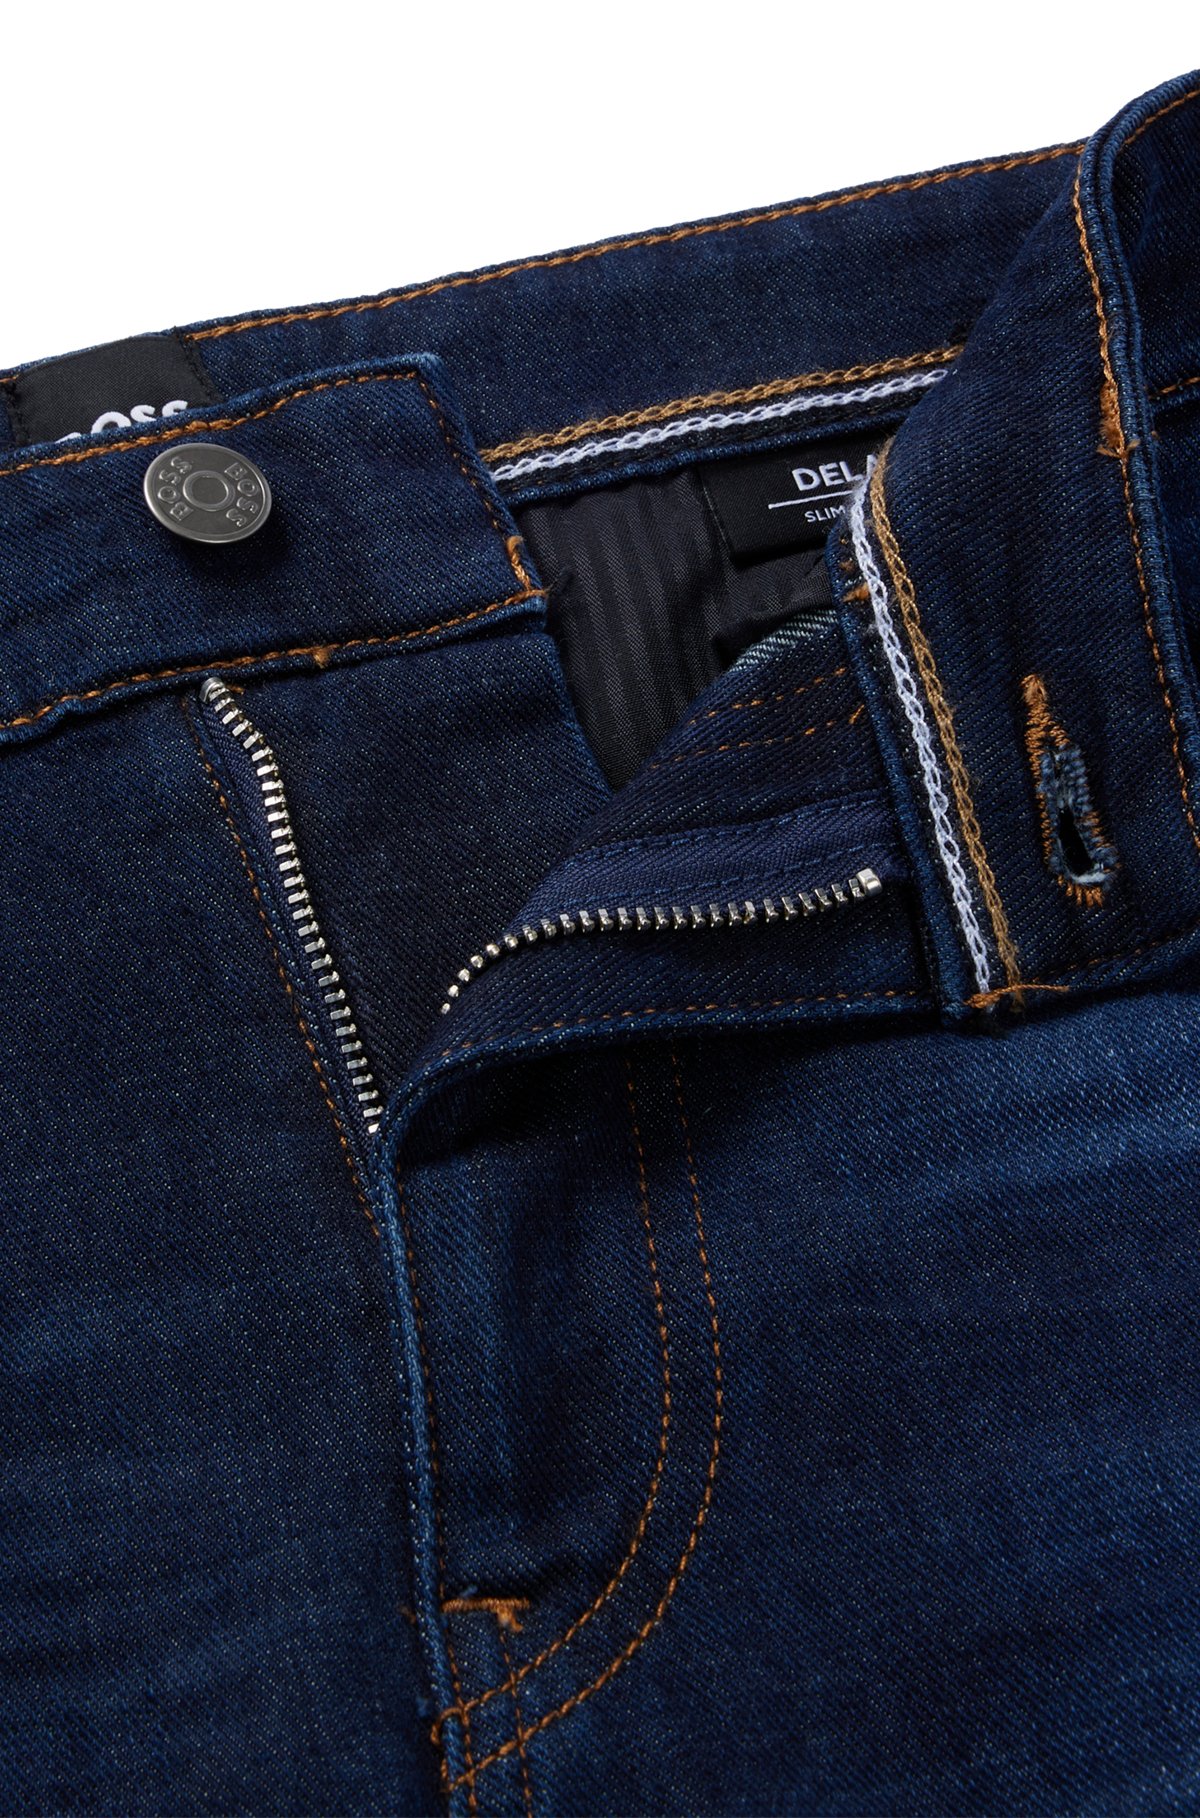 PLEASE Jeans Slim Fit blue/blau (Preowned) discounts shops www.abs.co.in